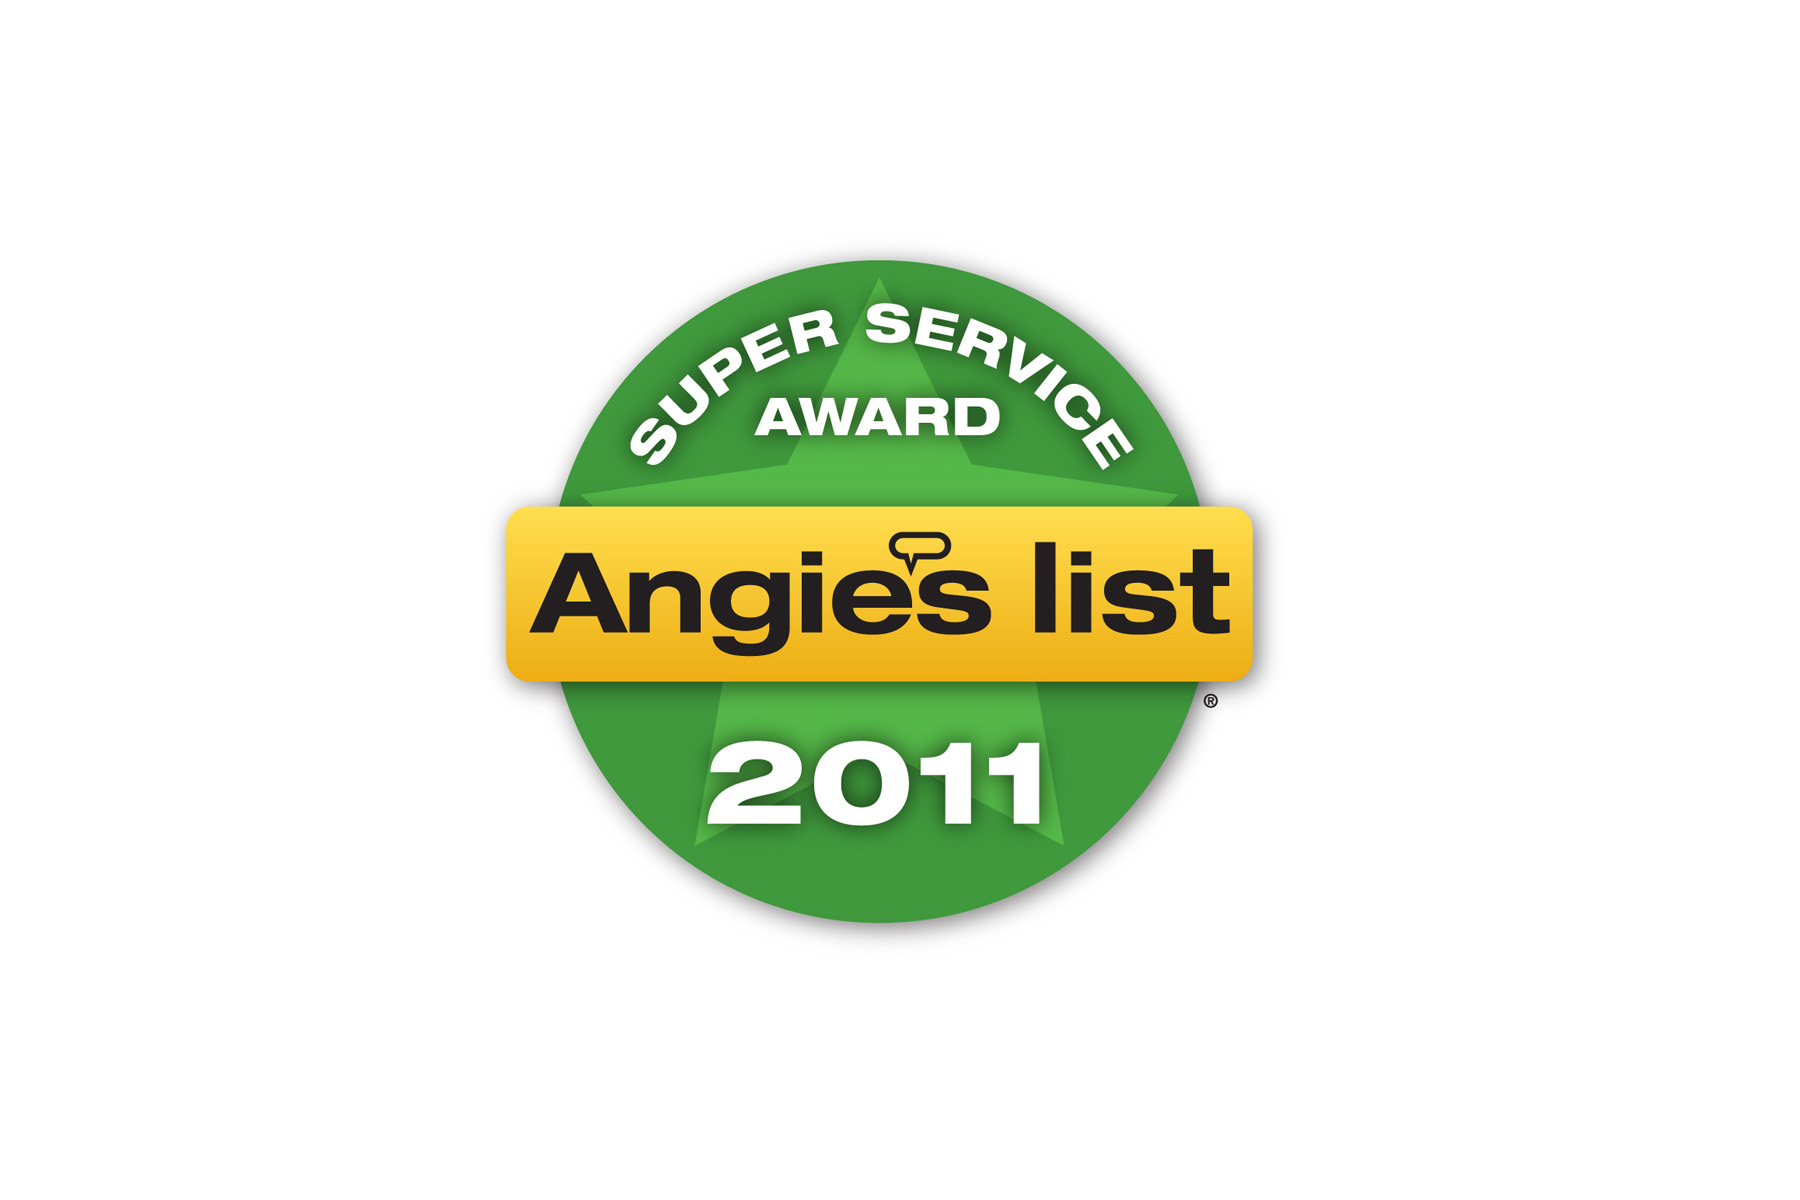 One Hour Heating and Air Conditioning Earns Coveted Angie’s List Super Service Award